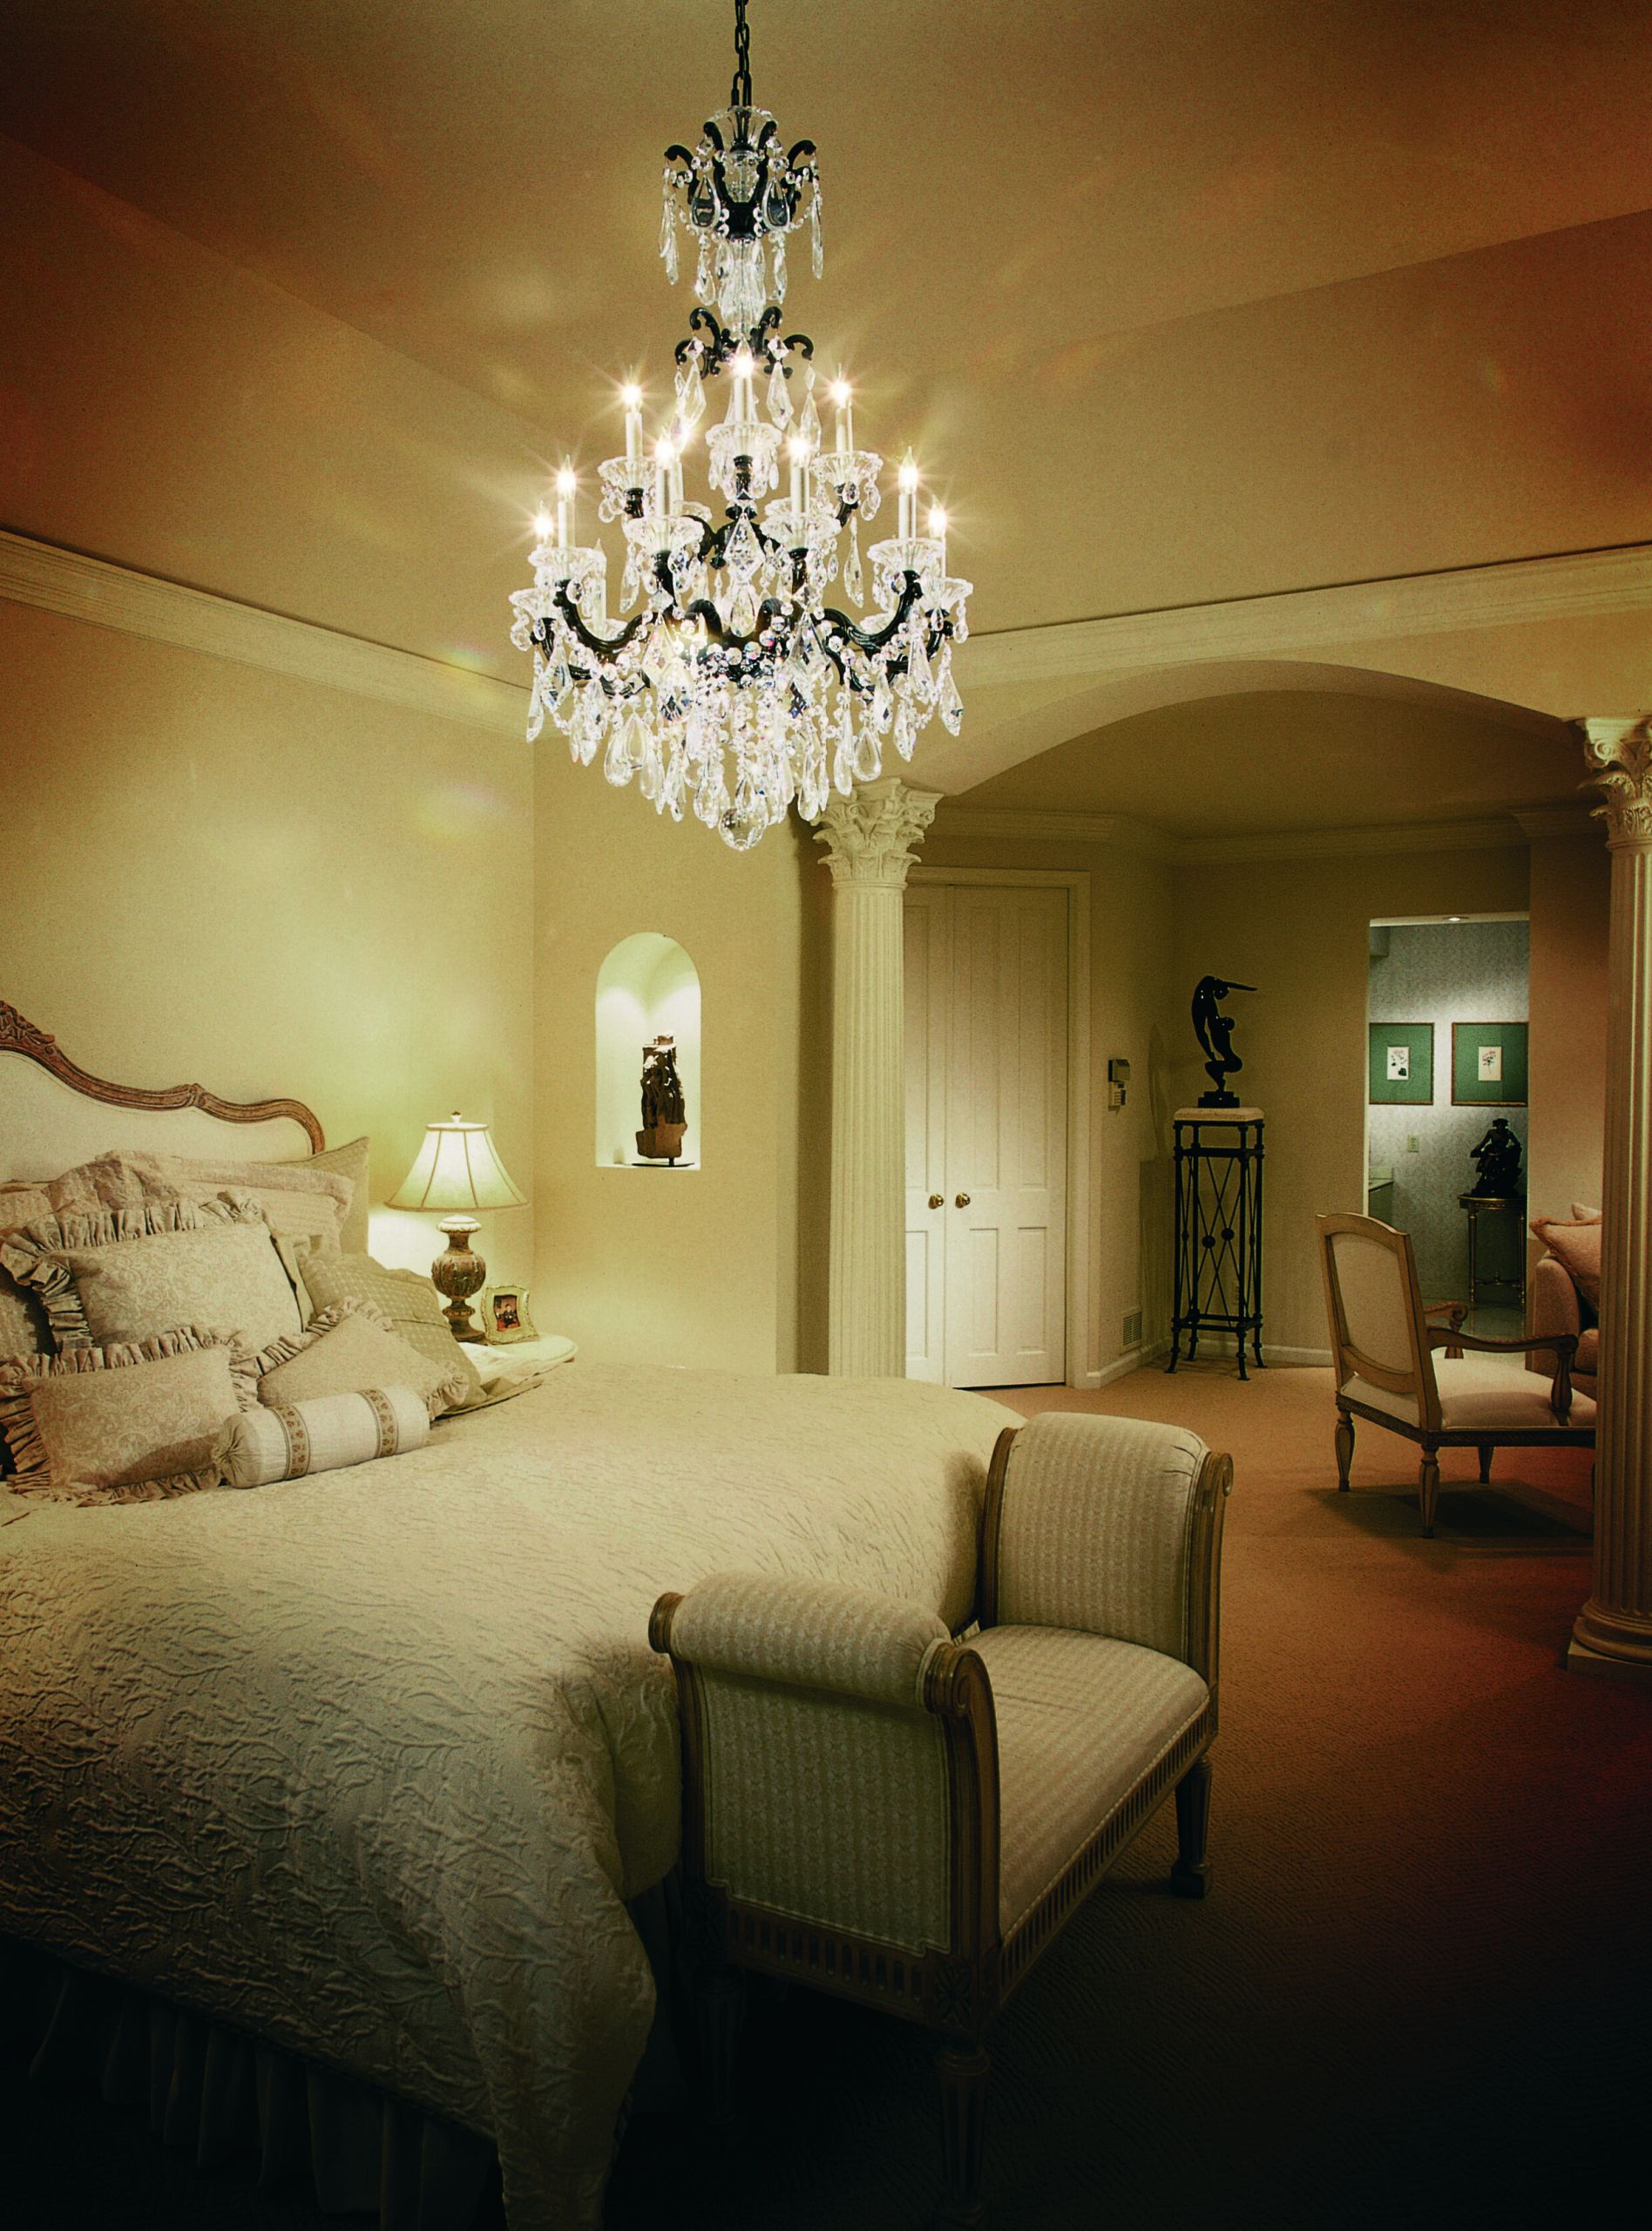 Chandelier Light for Bedroom Inspirational Make A Grand Statement with Chandeliers In the Bedroom